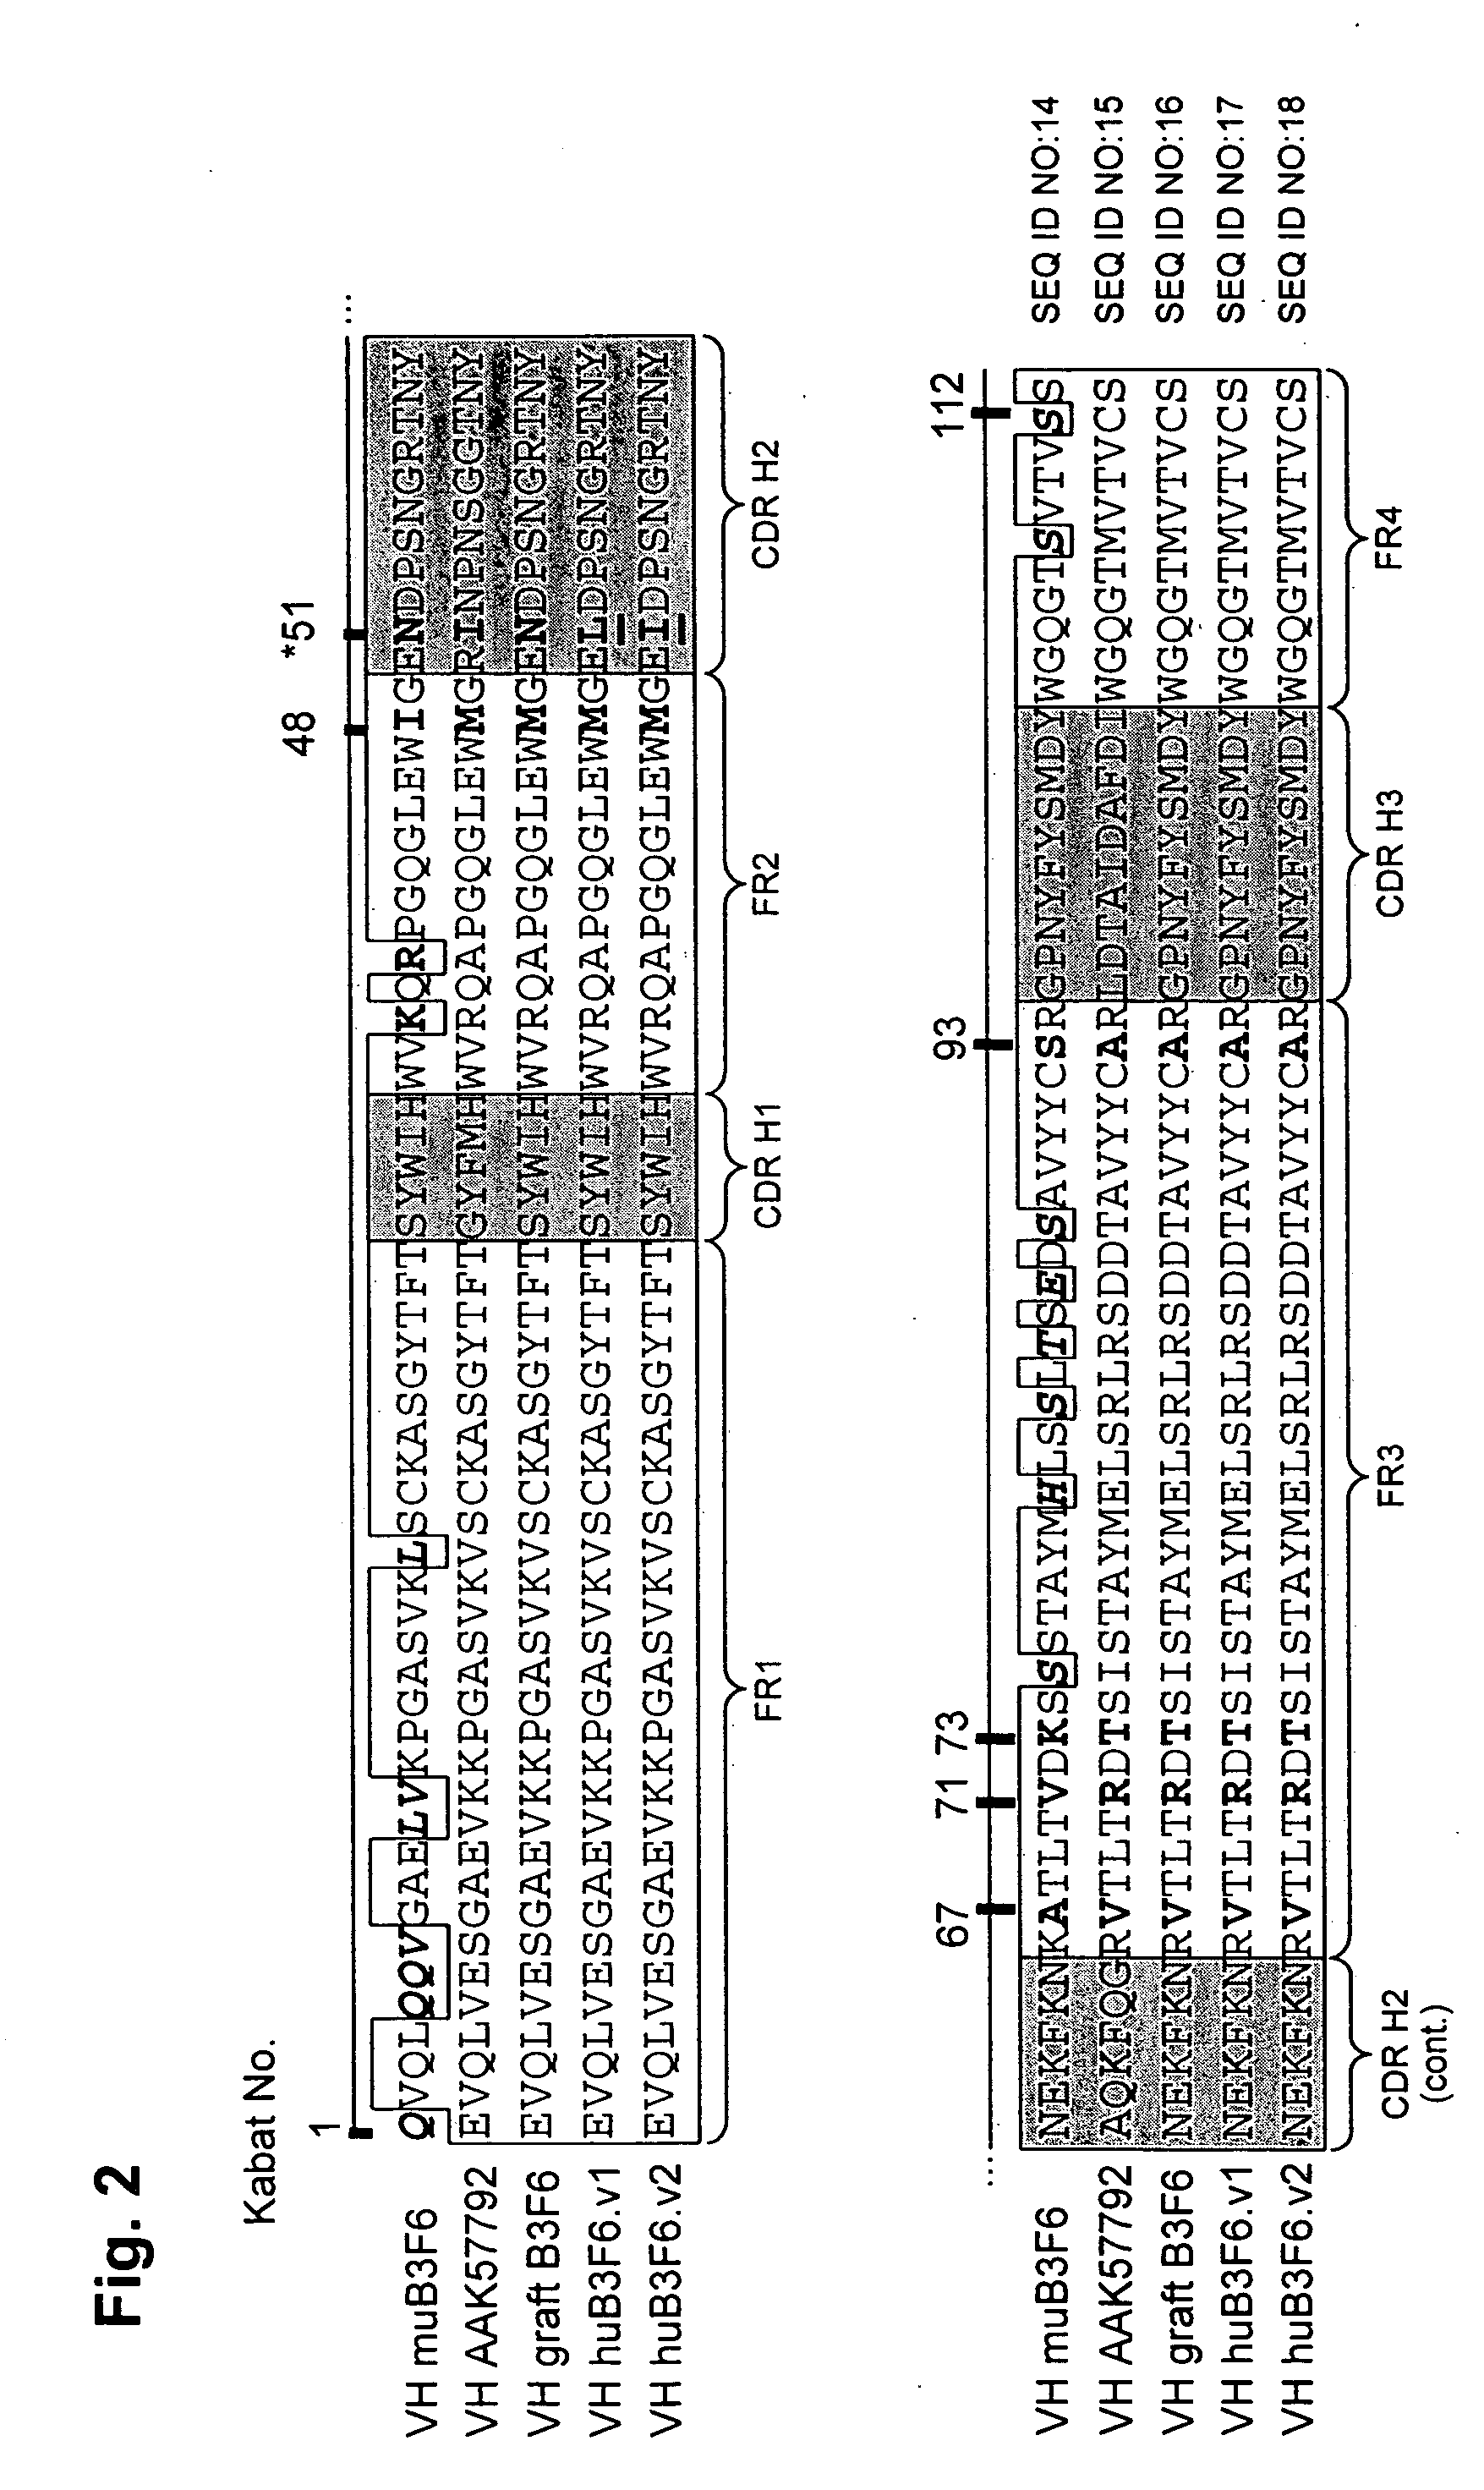 Methods of humanizing immunoglobulin variable regions through rational modification of complementarity determining residues